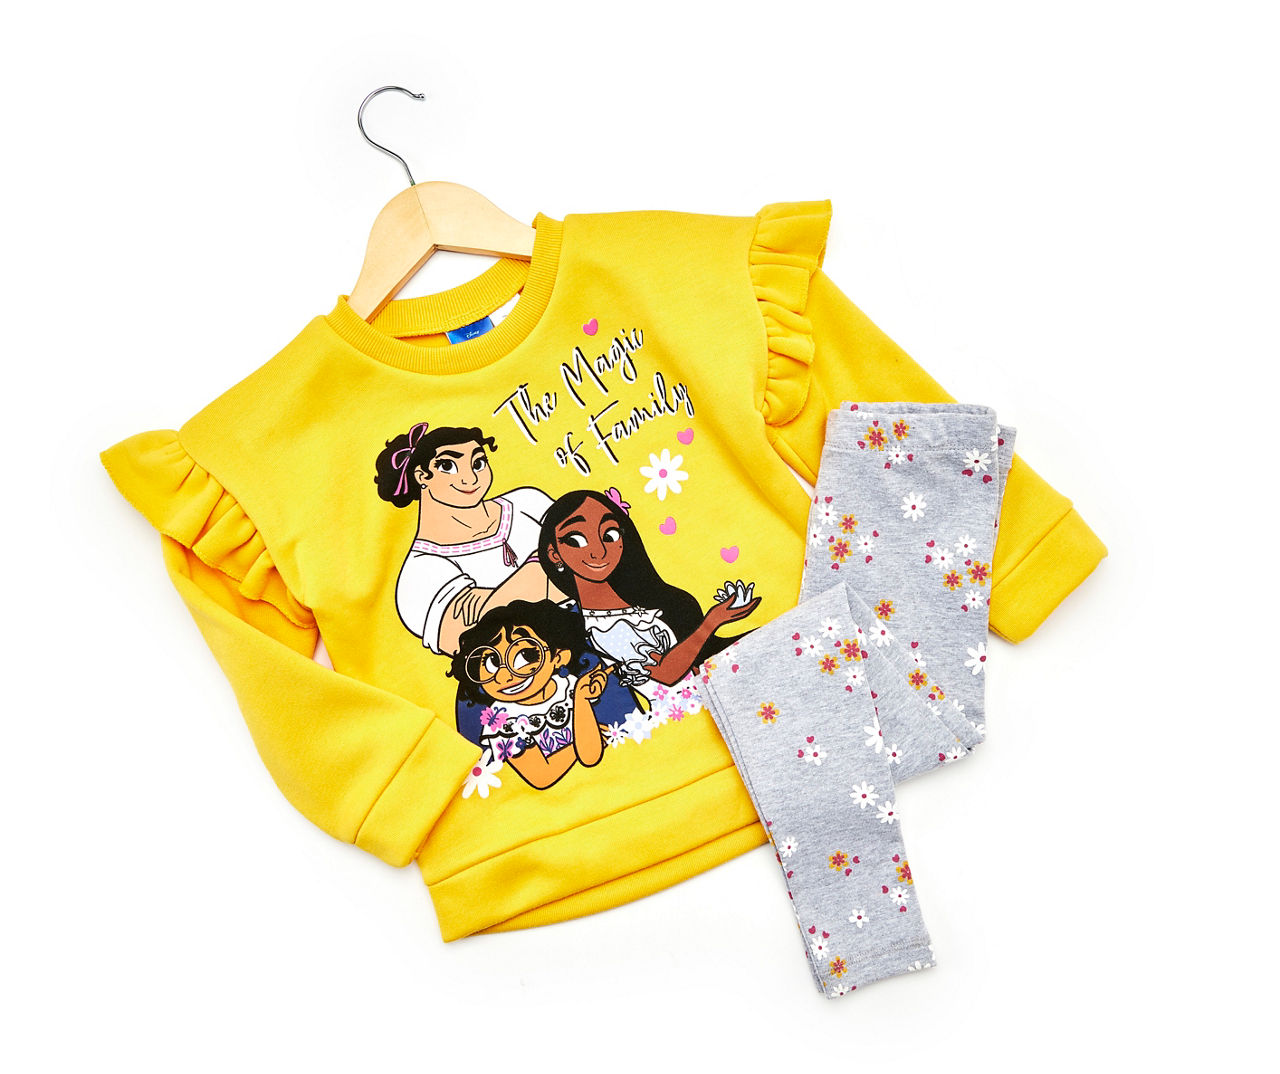 Toddler Size 3T "Magic of Family" Encanto Yellow & Gray Floral Ruffle-Accent 2-Piece Fleece Outfit